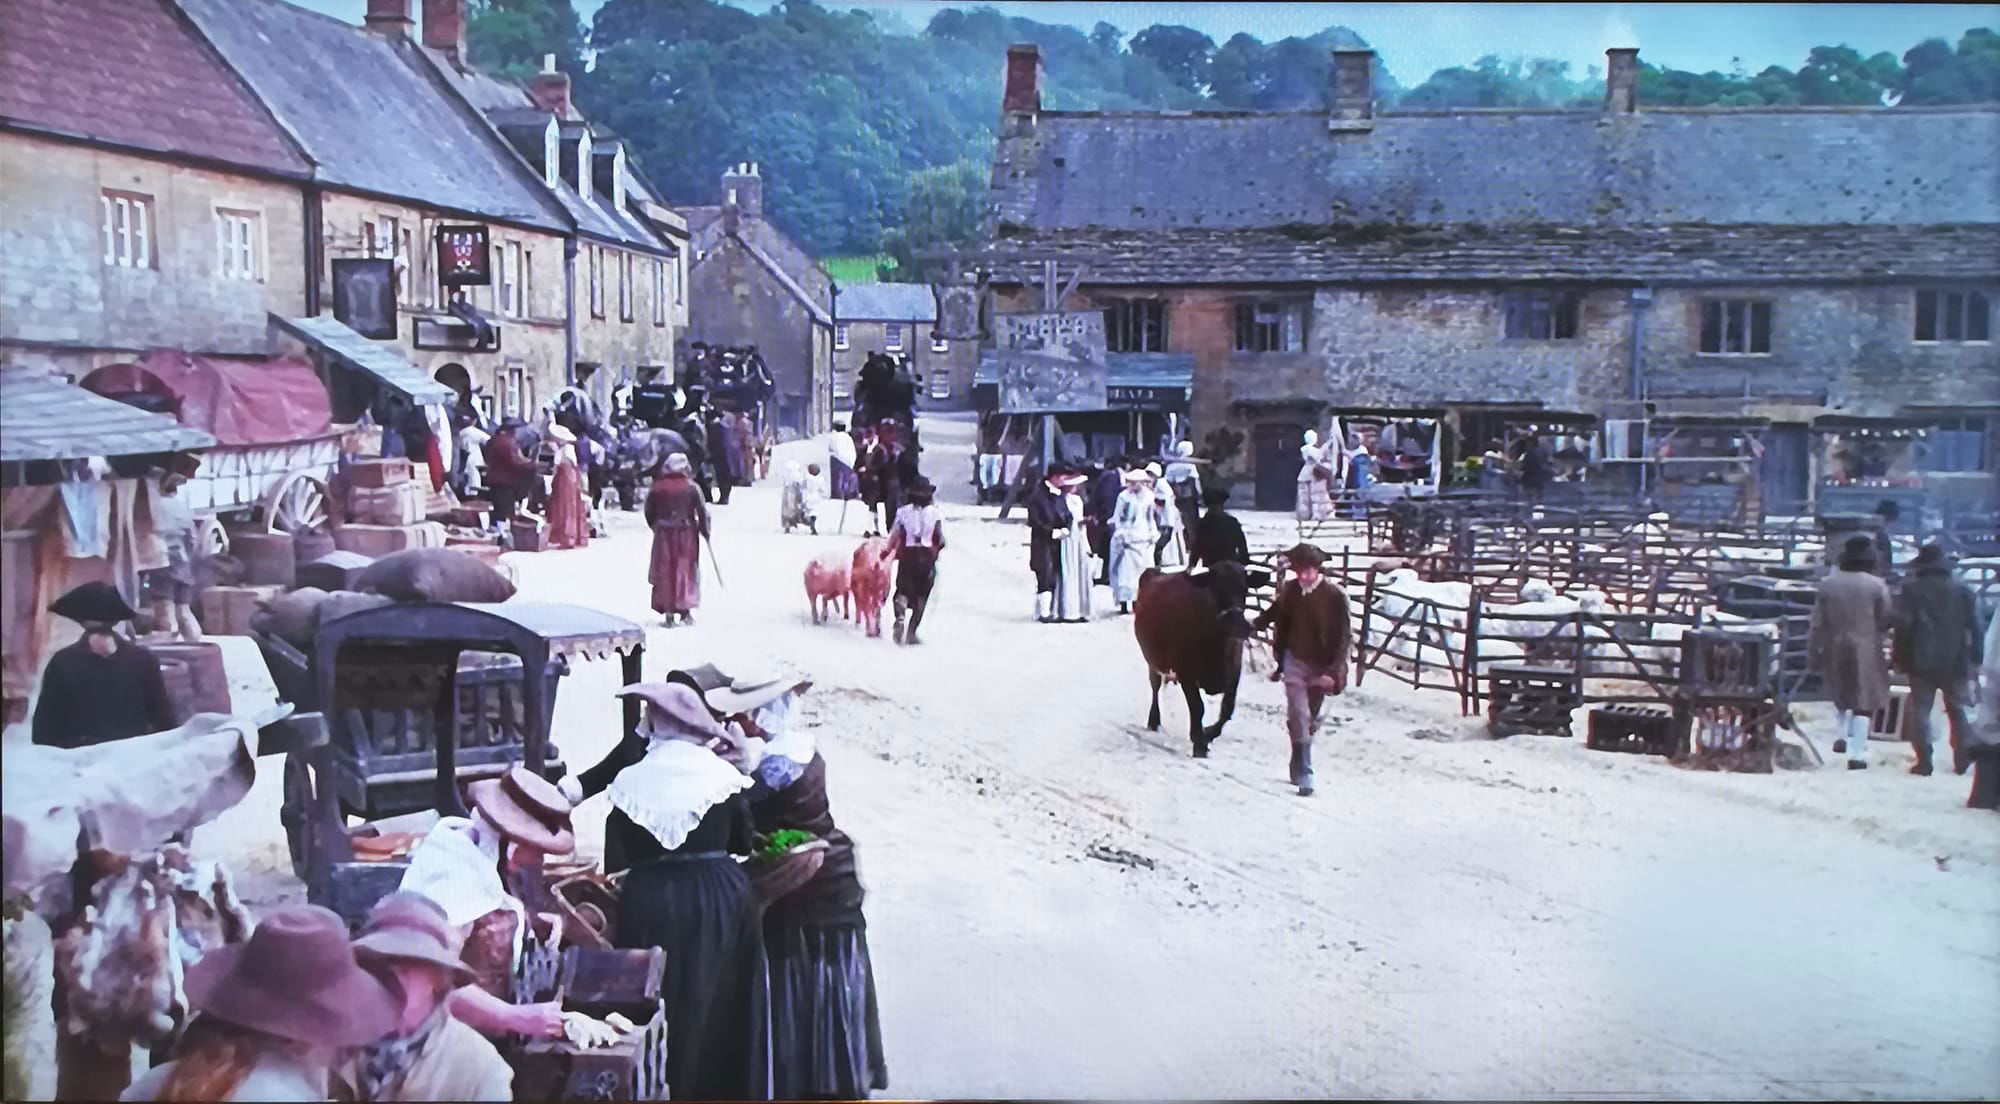 Colour photo of Montacute Borough viewed looking south with the Phelips on the left and the Milk House ahead. The picture has been screen-shotted from Ang Lee's 1995 film 'Sense and Sensibility'. There are pens containing sheep in the Borough and a man is leading a cow along the road while someone else leads 2 goats. There are stalls along the left-hand side of the road. People are browsing the stalls and standing in the Borough; dress is late 18th century. 